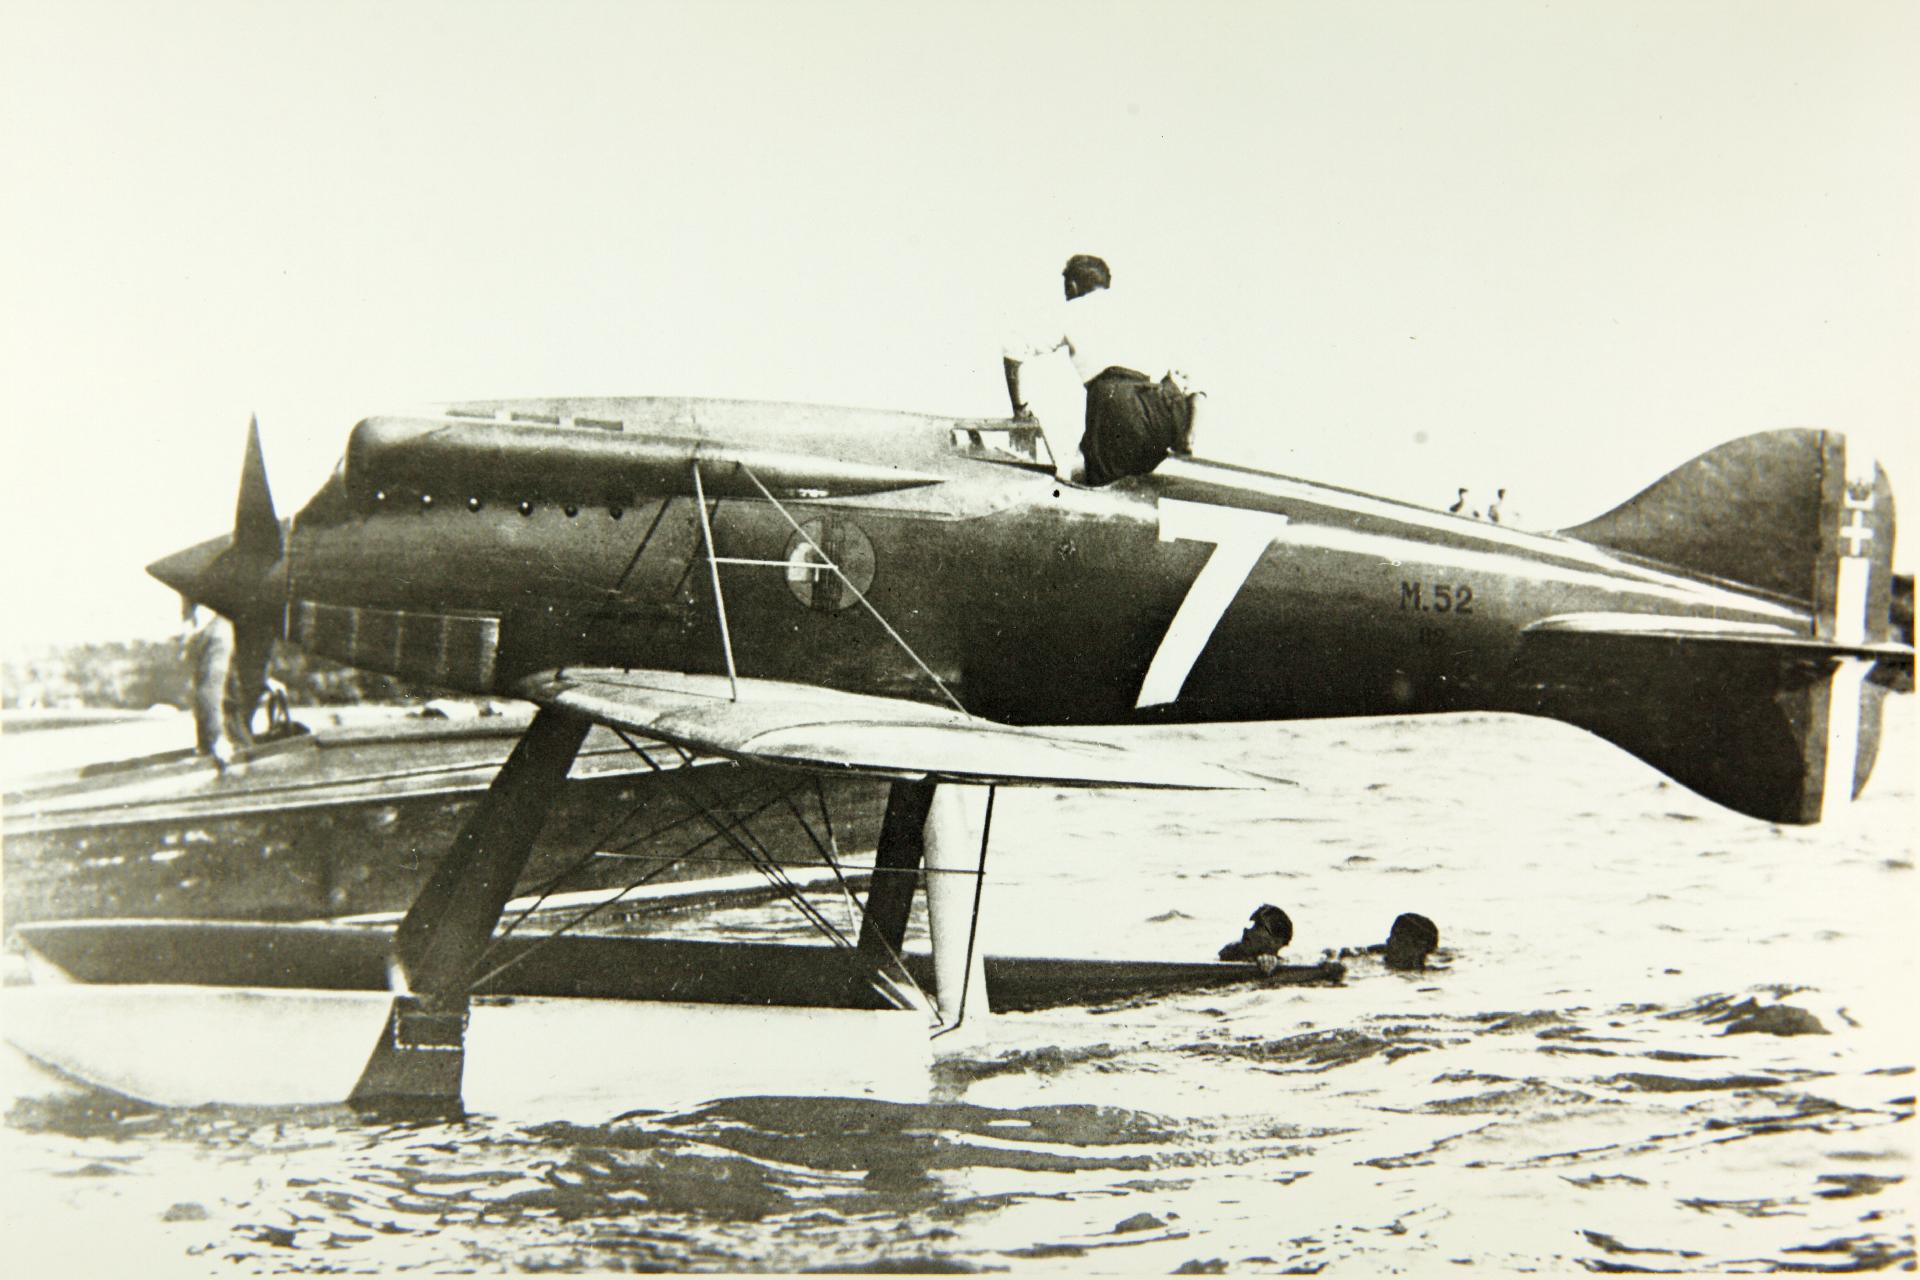 Macchi M.52 number 7. (San Diego Air and Space Museum Archive)